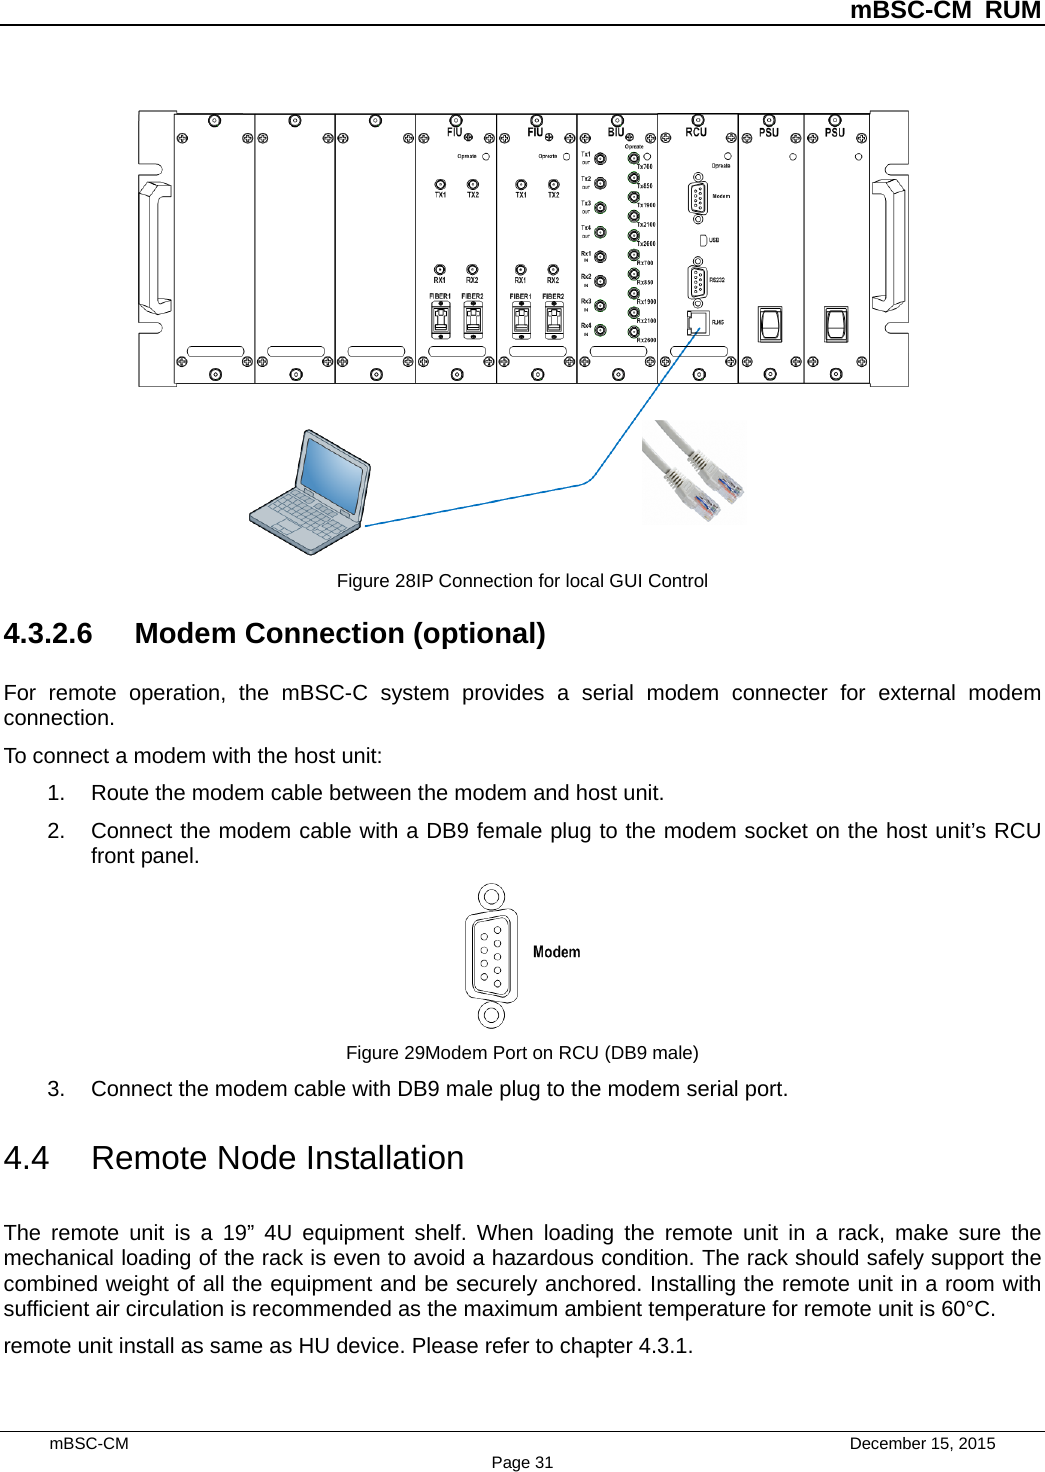          mBSC-CM RUM   mBSC-CM                                 December 15, 2015 Page 31  Figure 28IP Connection for local GUI Control 4.3.2.6 Modem Connection (optional) For remote operation, the mBSC-C system provides a serial modem connecter for external modem connection. To connect a modem with the host unit: 1. Route the modem cable between the modem and host unit. 2. Connect the modem cable with a DB9 female plug to the modem socket on the host unit’s RCU front panel.  Figure 29Modem Port on RCU (DB9 male) 3. Connect the modem cable with DB9 male plug to the modem serial port. 4.4 Remote Node Installation The remote unit is a 19” 4U equipment shelf. When loading the remote unit in a rack, make sure the mechanical loading of the rack is even to avoid a hazardous condition. The rack should safely support the combined weight of all the equipment and be securely anchored. Installing the remote unit in a room with sufficient air circulation is recommended as the maximum ambient temperature for remote unit is 60°C.   remote unit install as same as HU device. Please refer to chapter 4.3.1.    